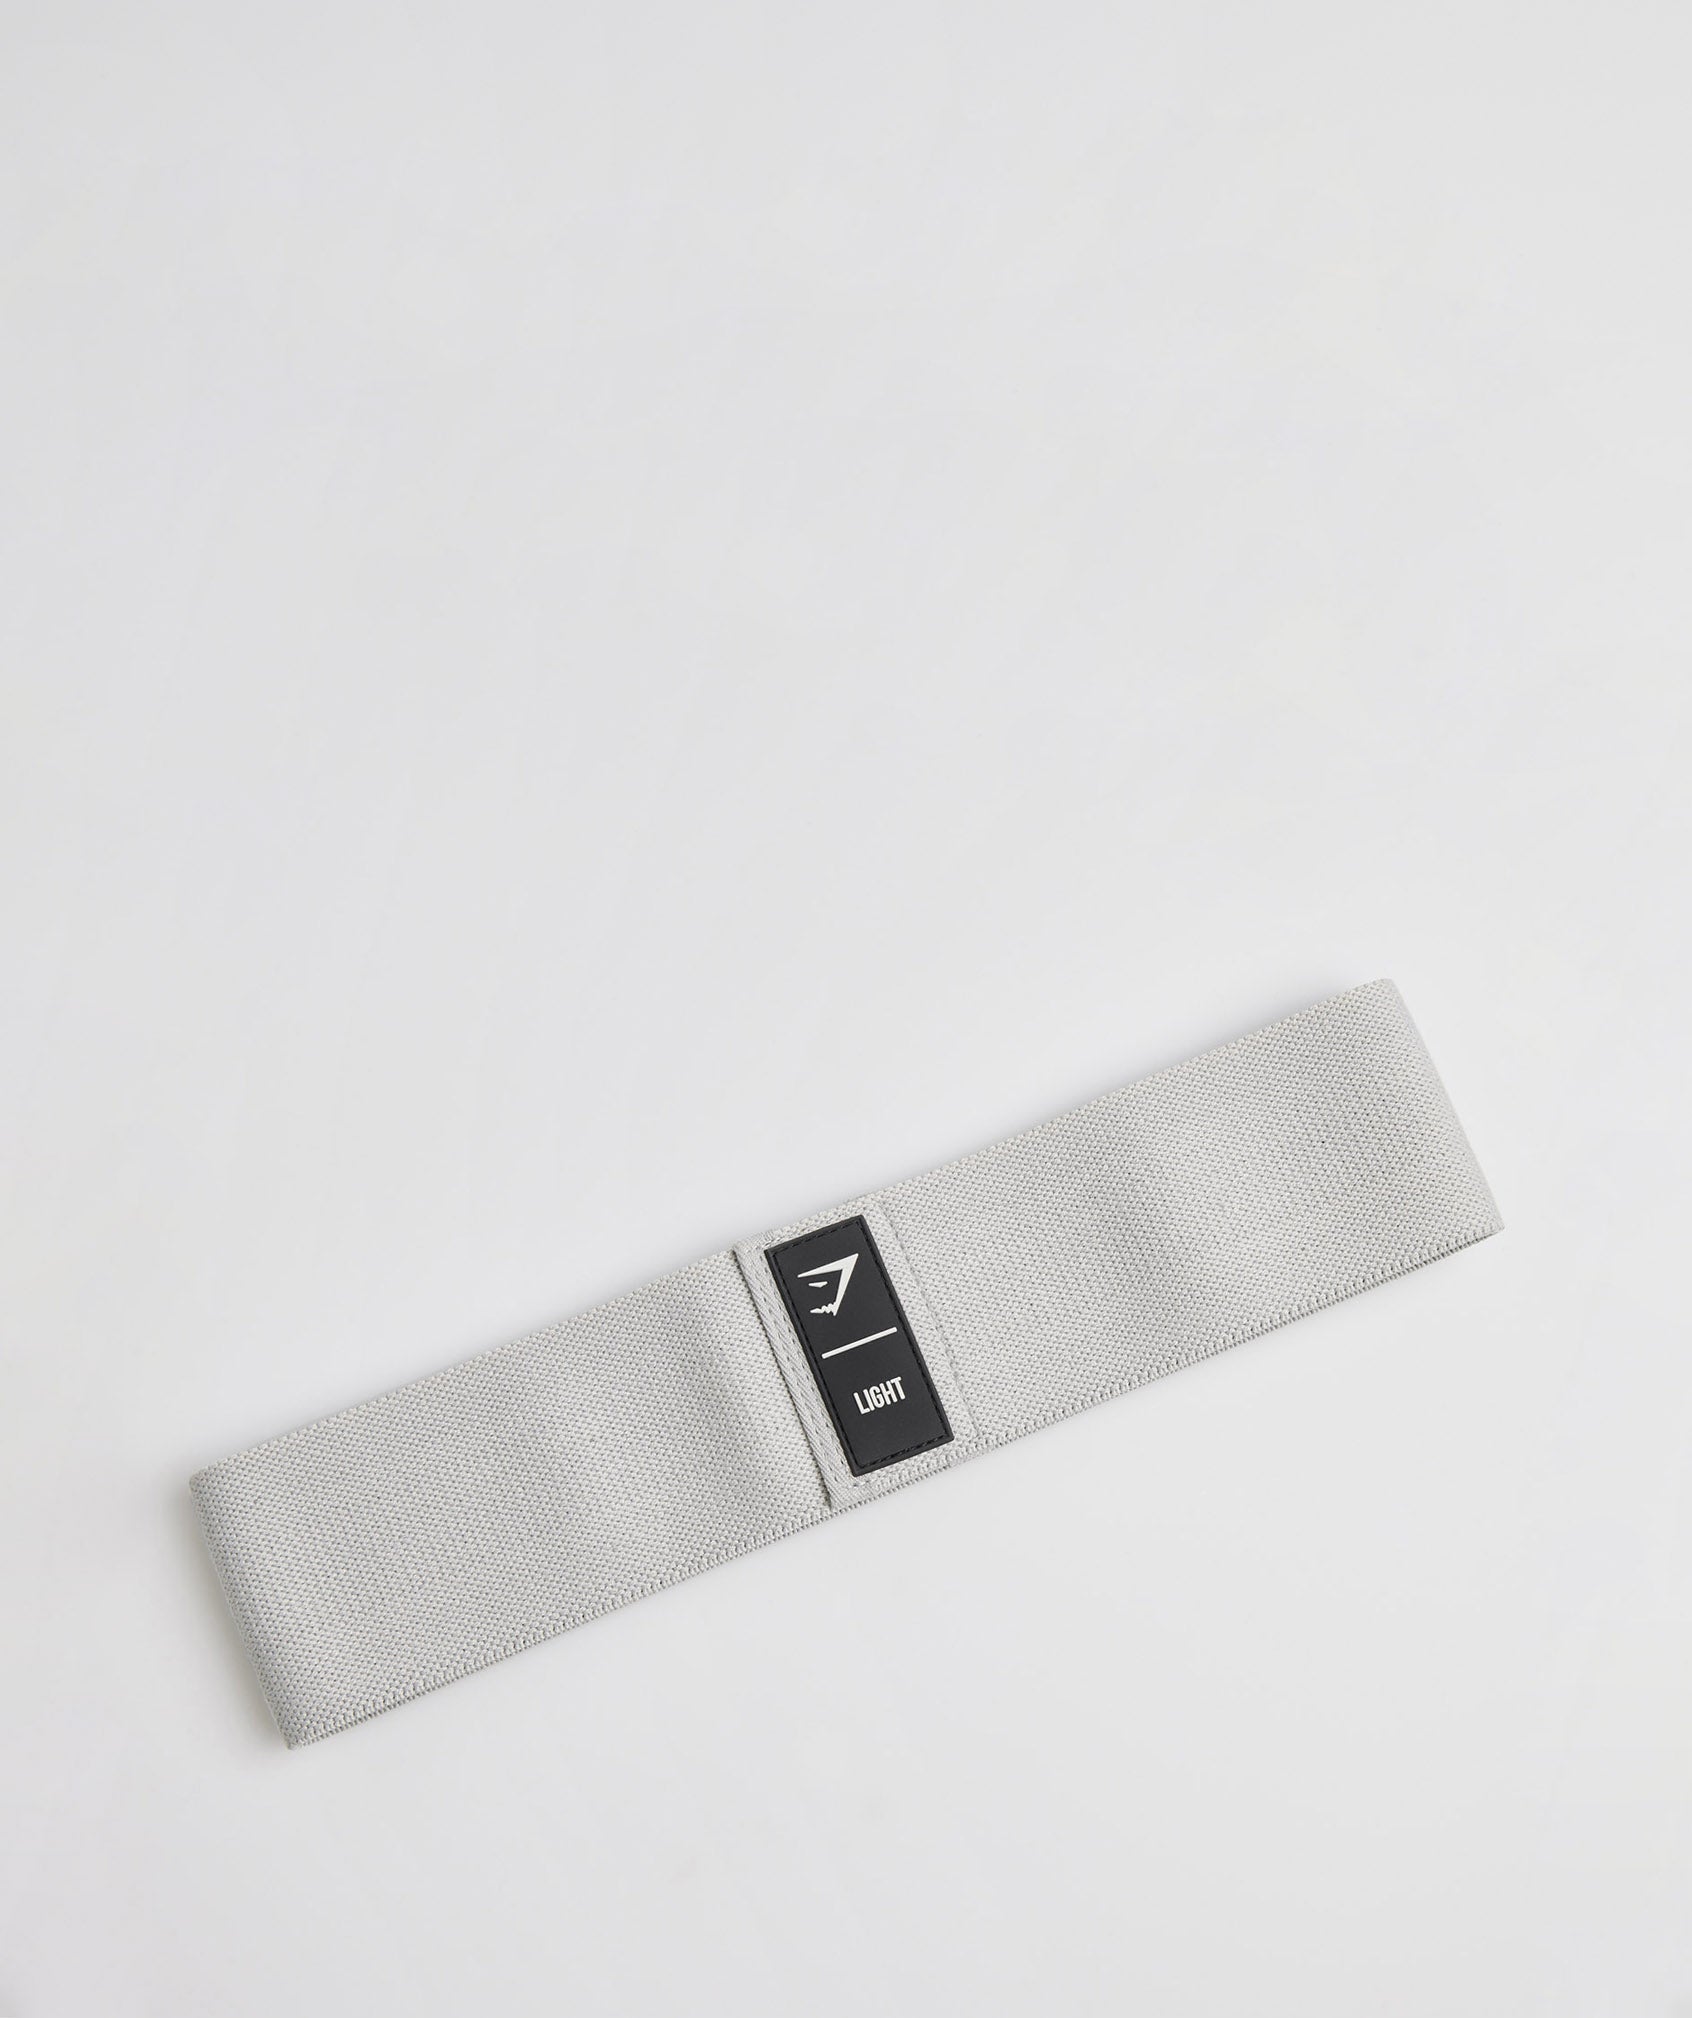 Light Glute Band in Light Grey